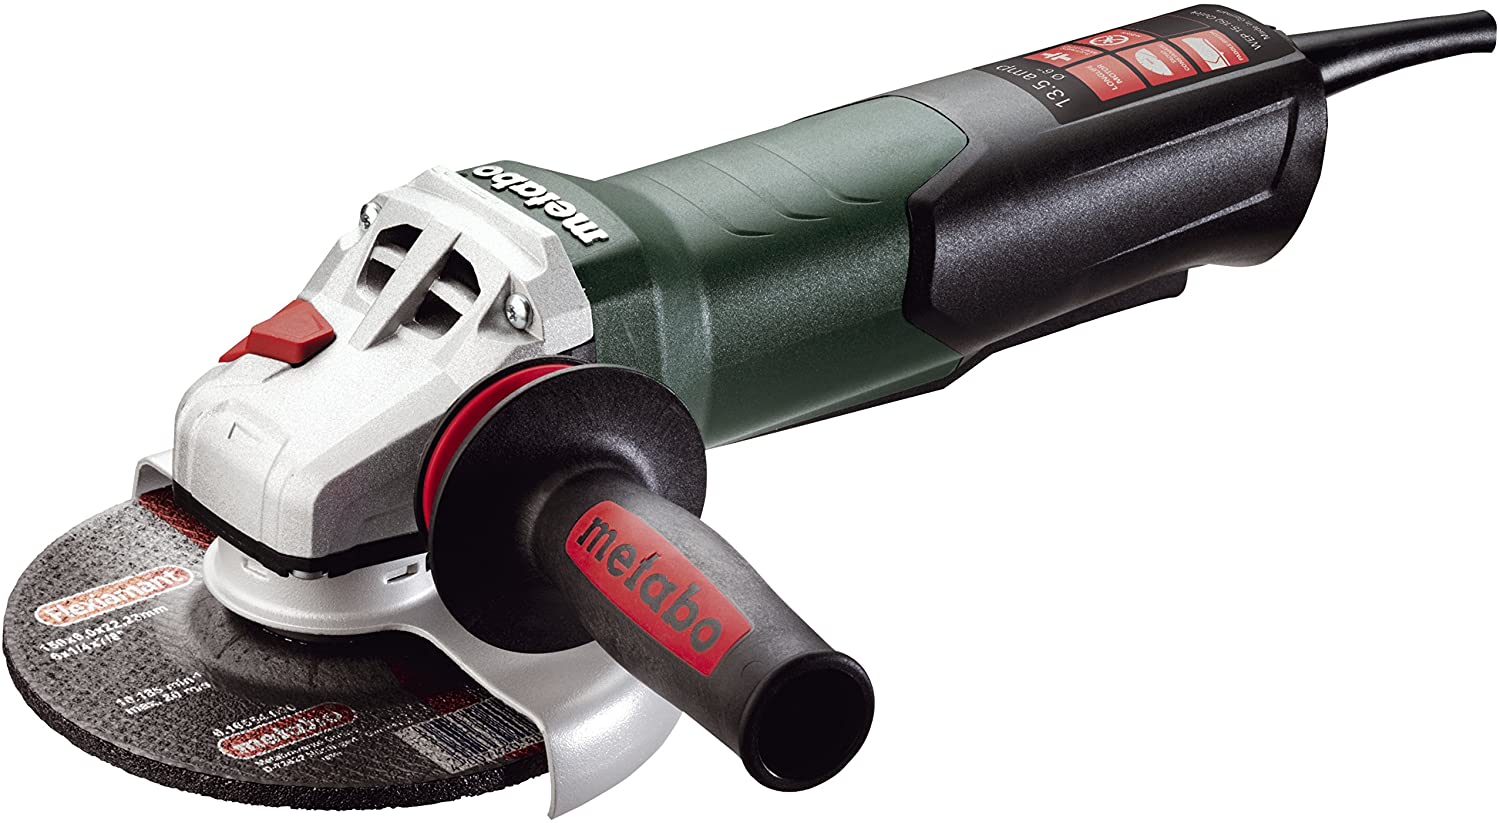 Metabo 6-Inch Angle Grinder, 13.5 Amp, 9,600 RPM, Electronics, Non-locking Paddle Switch, Made in Germany, WEP 15-150 Quick, 600488420, Green